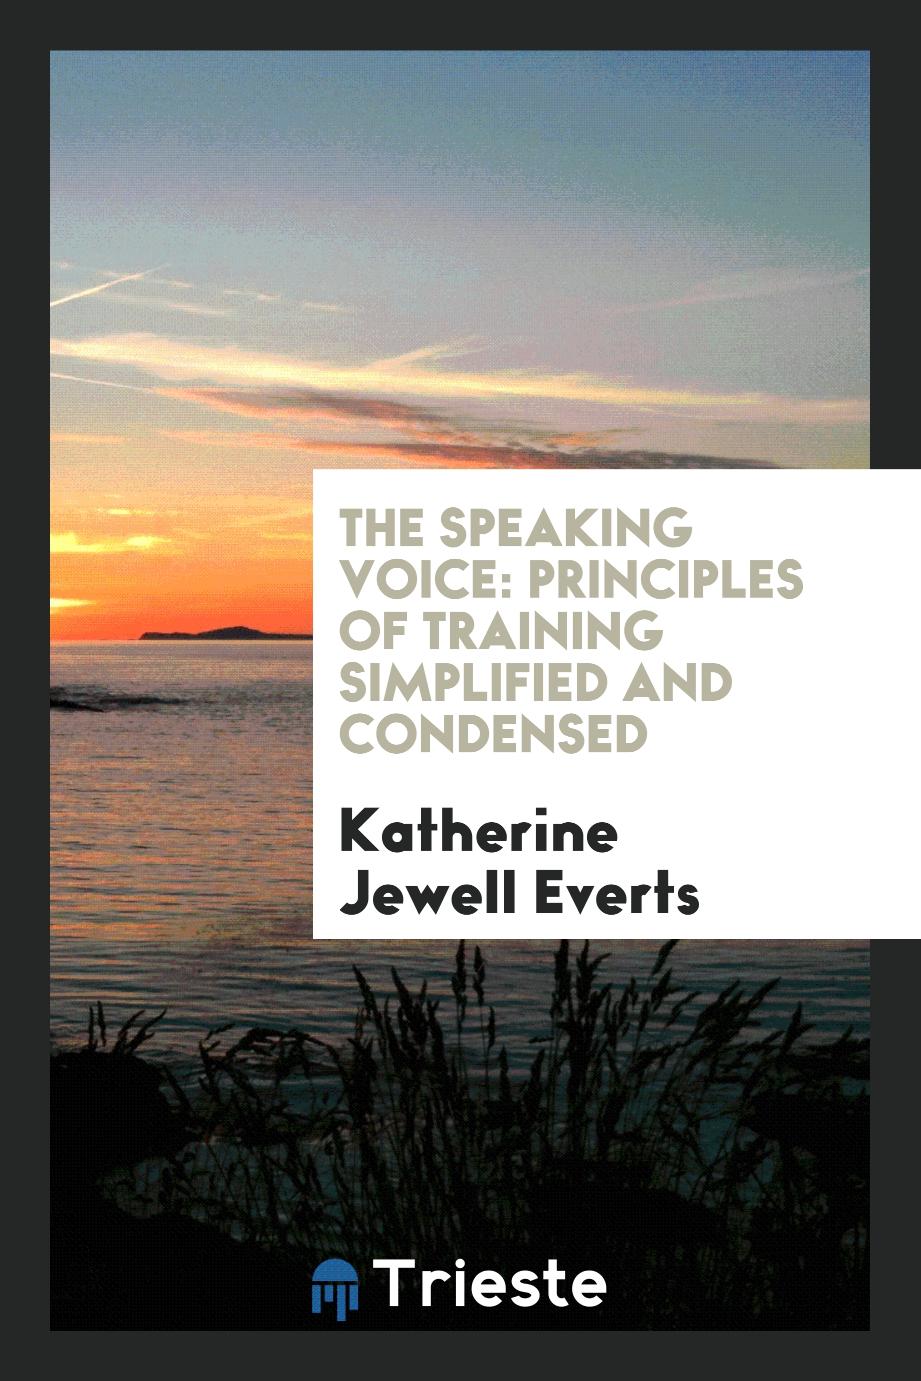 The speaking voice: principles of training simplified and condensed